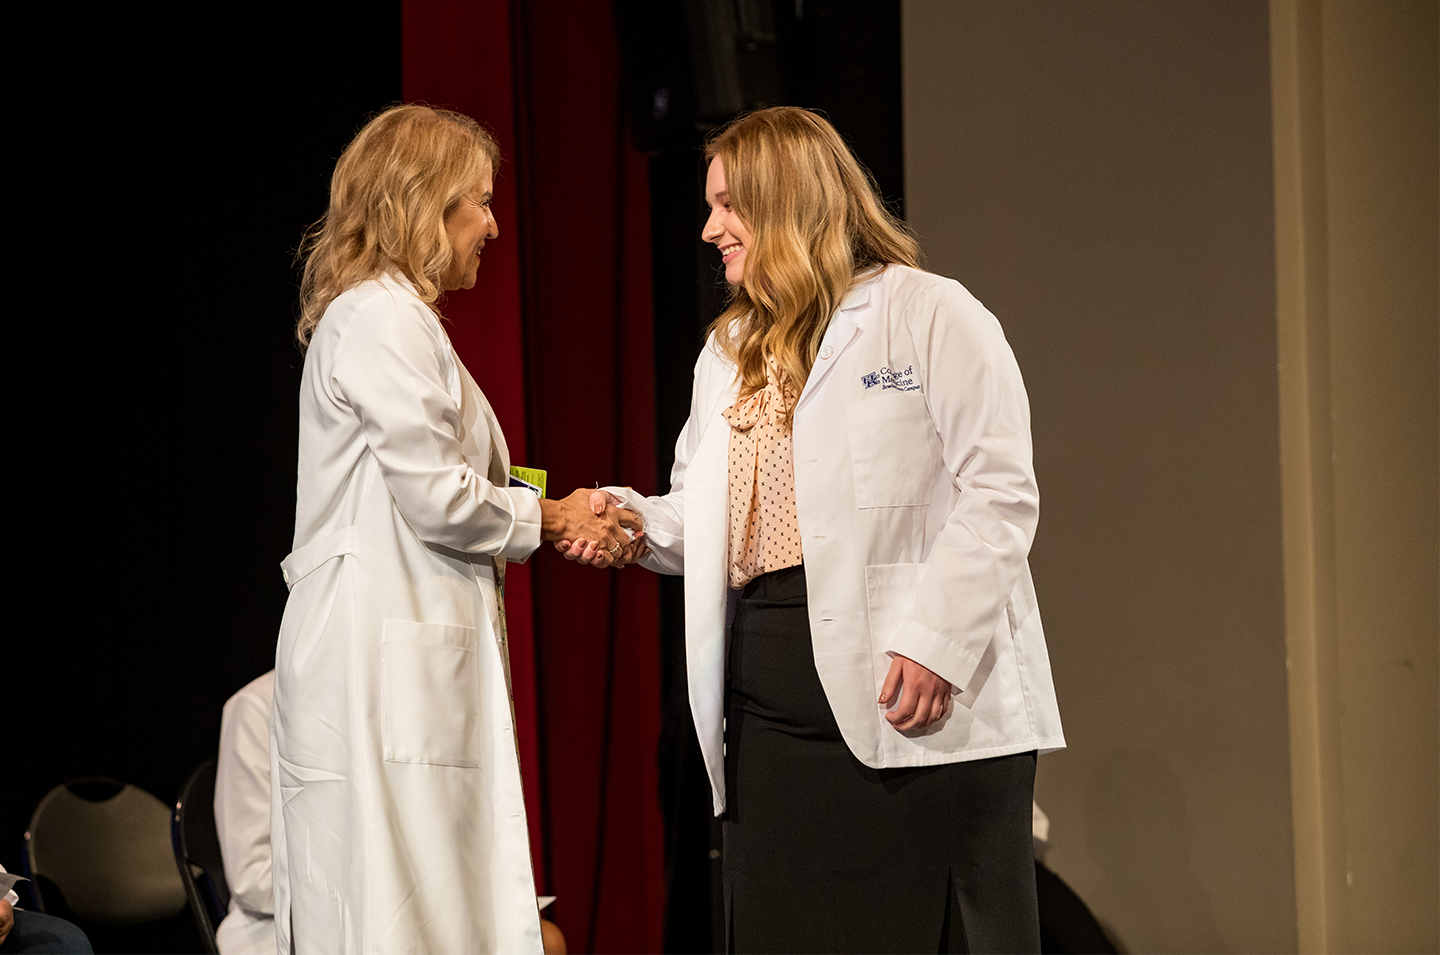 new student shakes hands with faculty member on stage at white coat ceremony